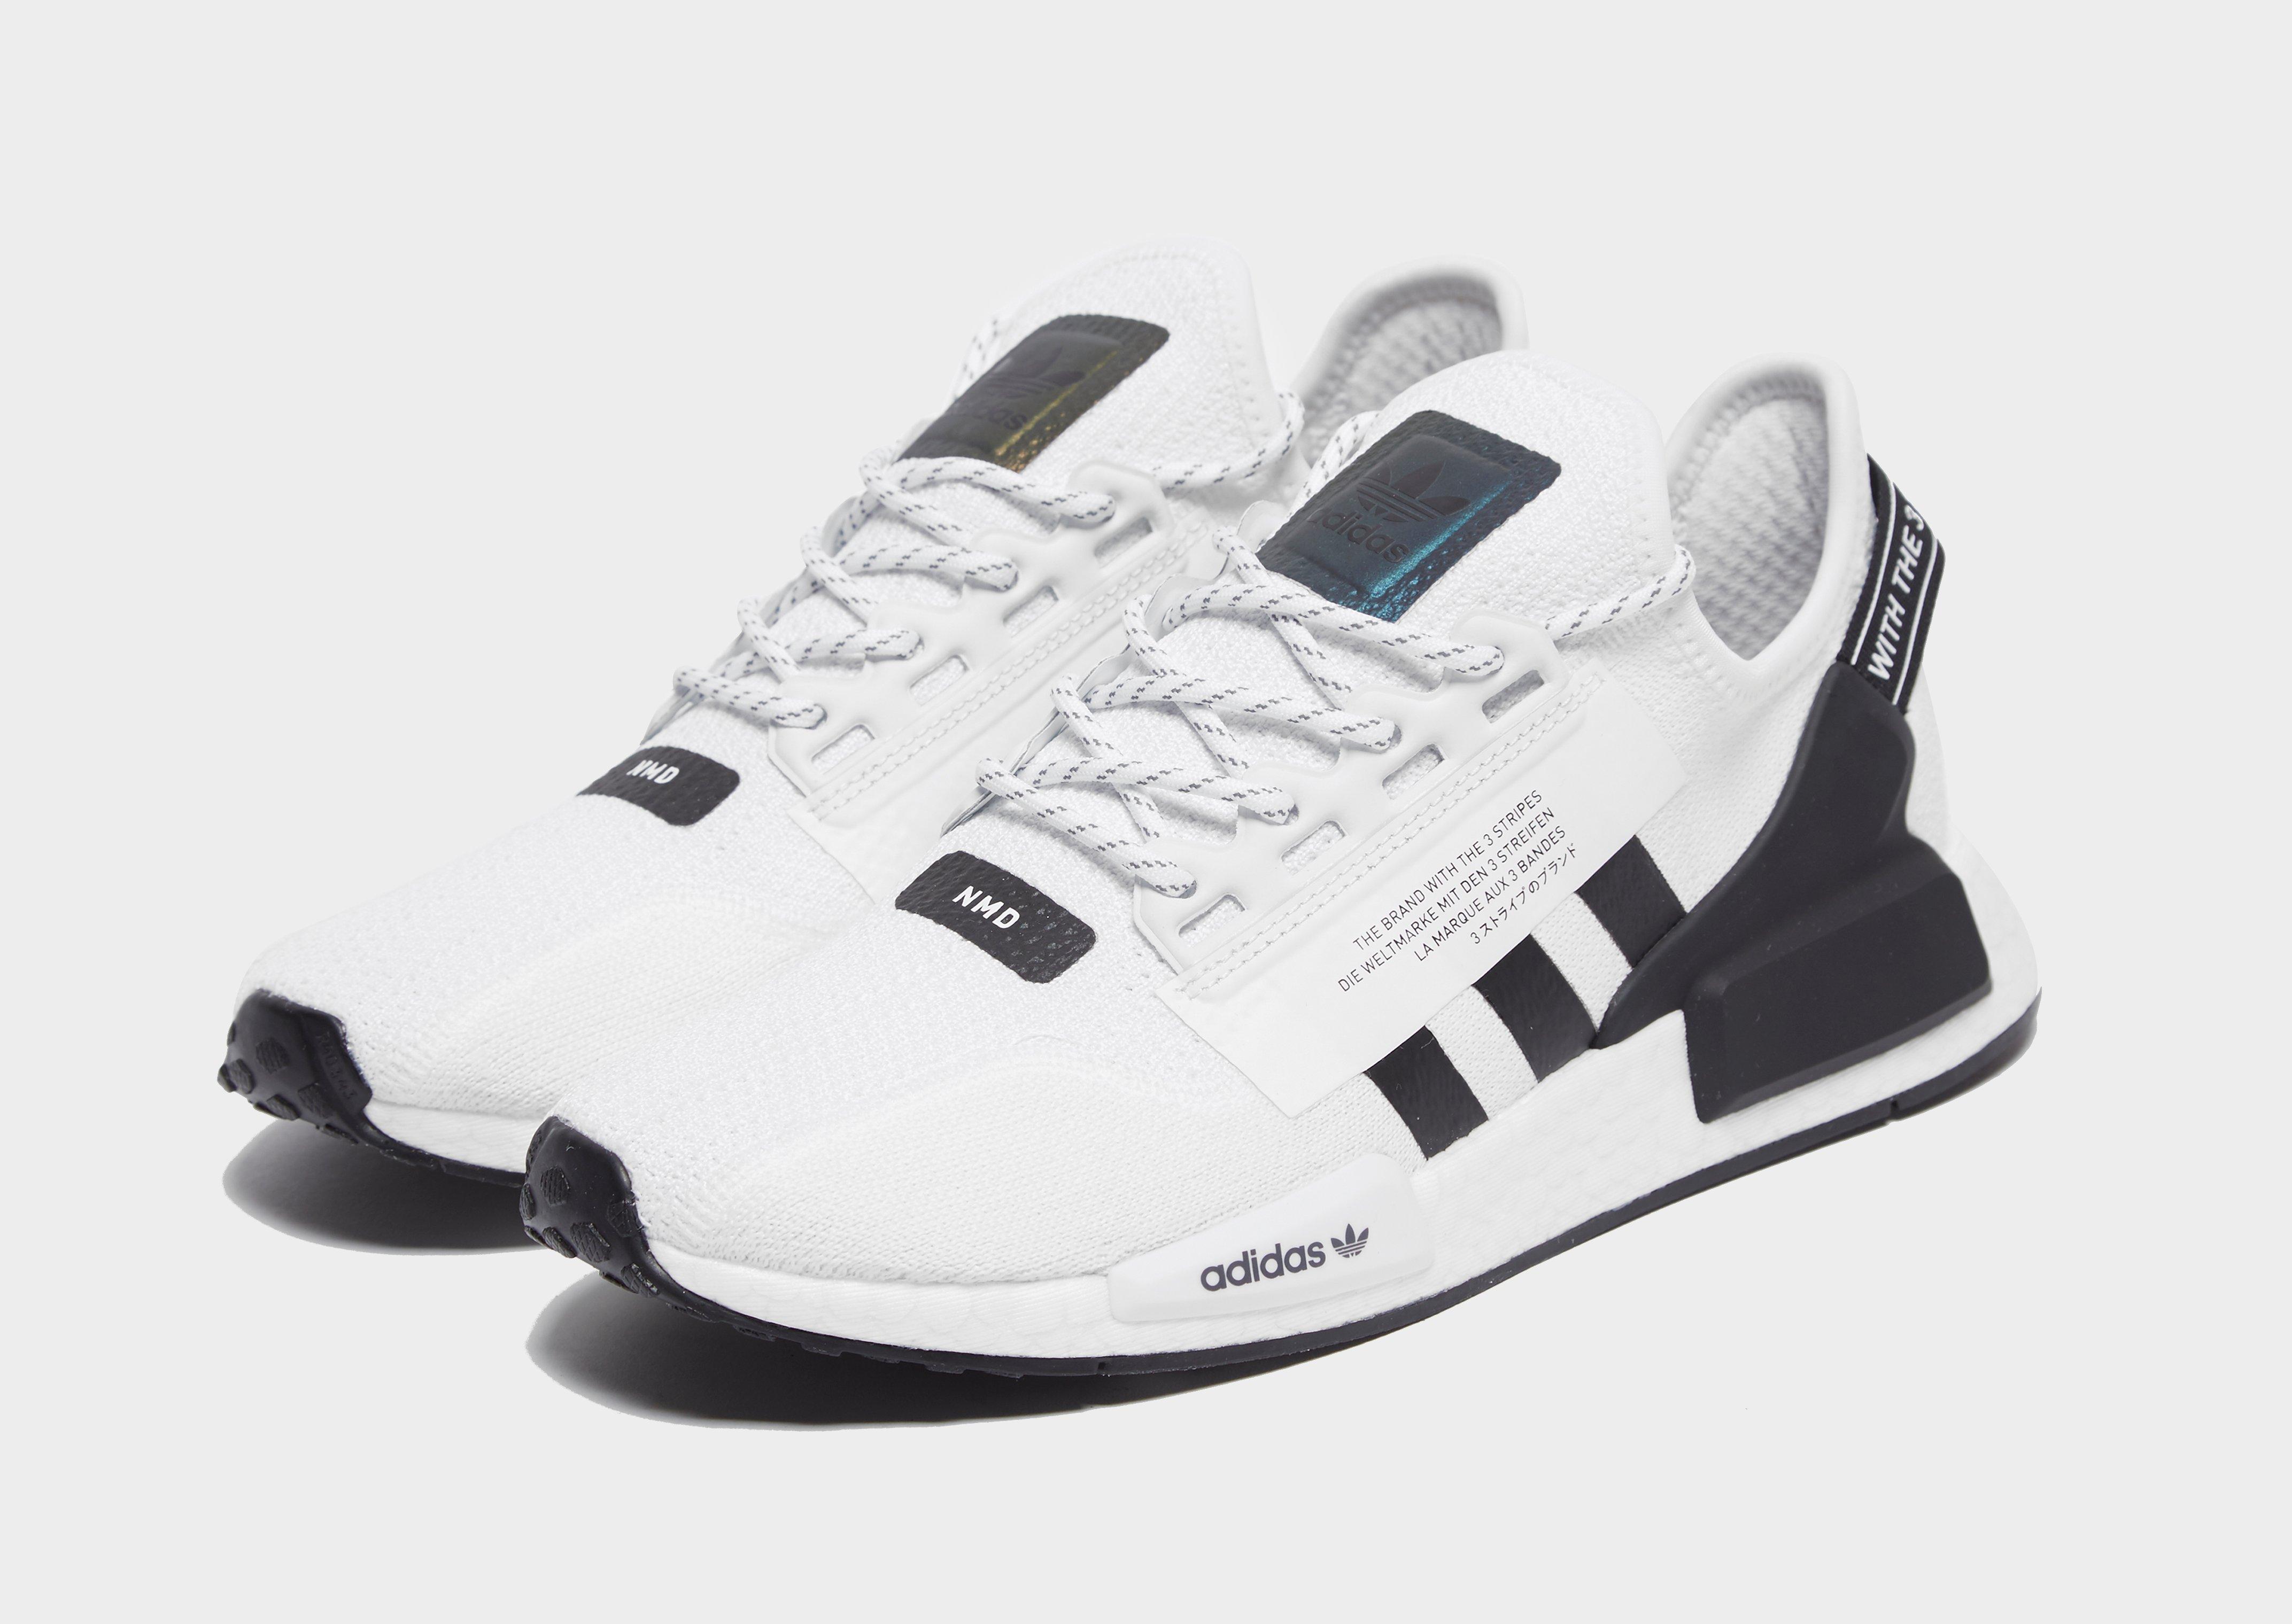 Original adidas nmd r1 white uk 95 Shoes for sale in Mid Valley